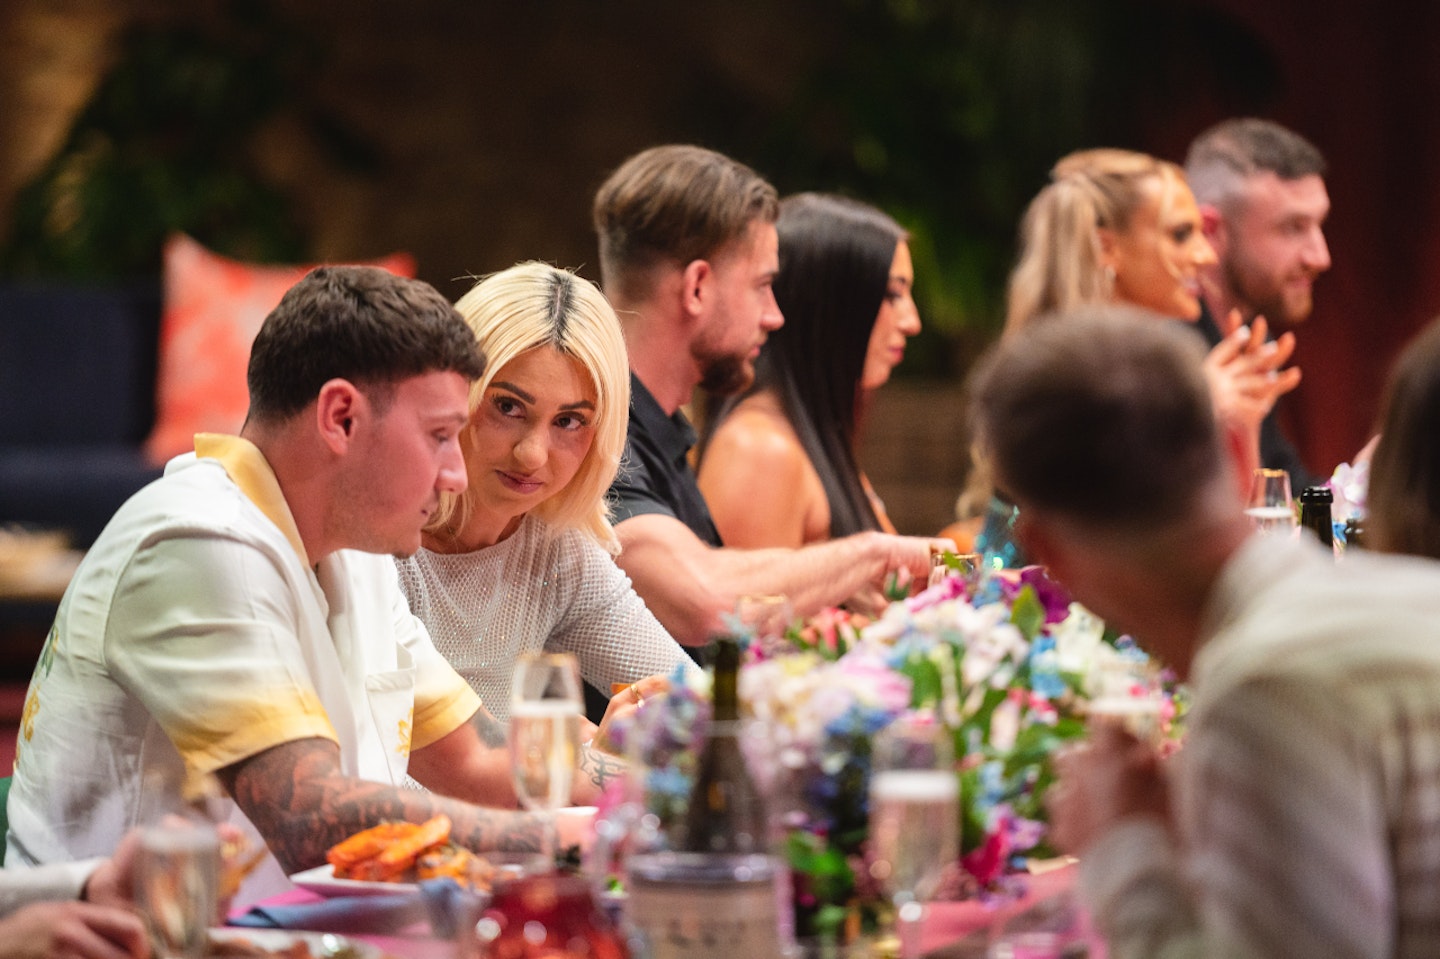 JJ and Bianca at a MAFS dinner party